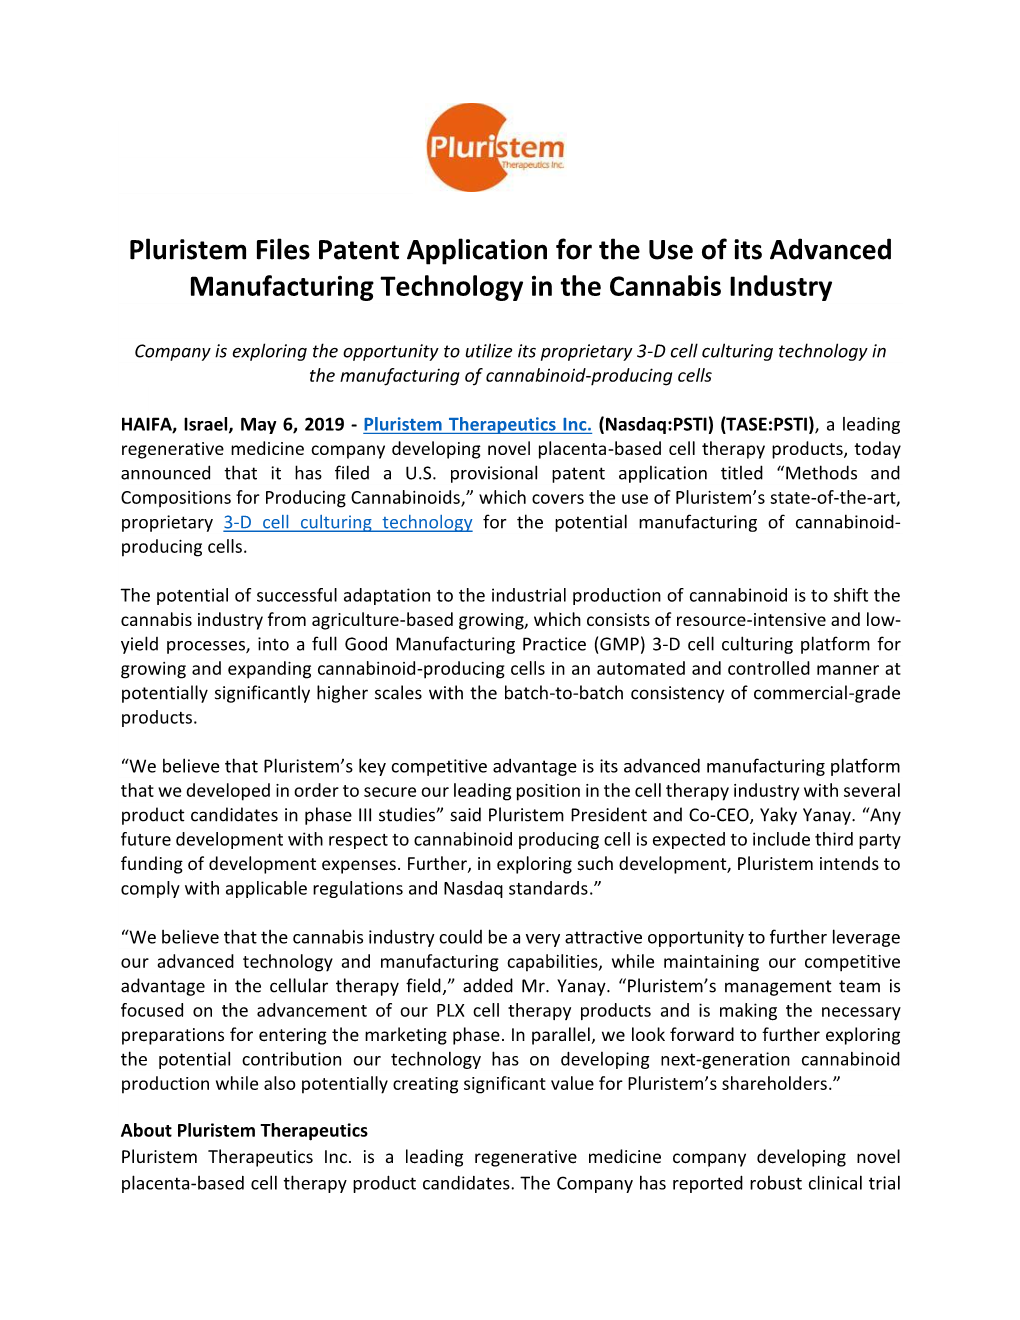 Pluristem Files Patent Application for the Use of Its Advanced Manufacturing Technology in the Cannabis Industry